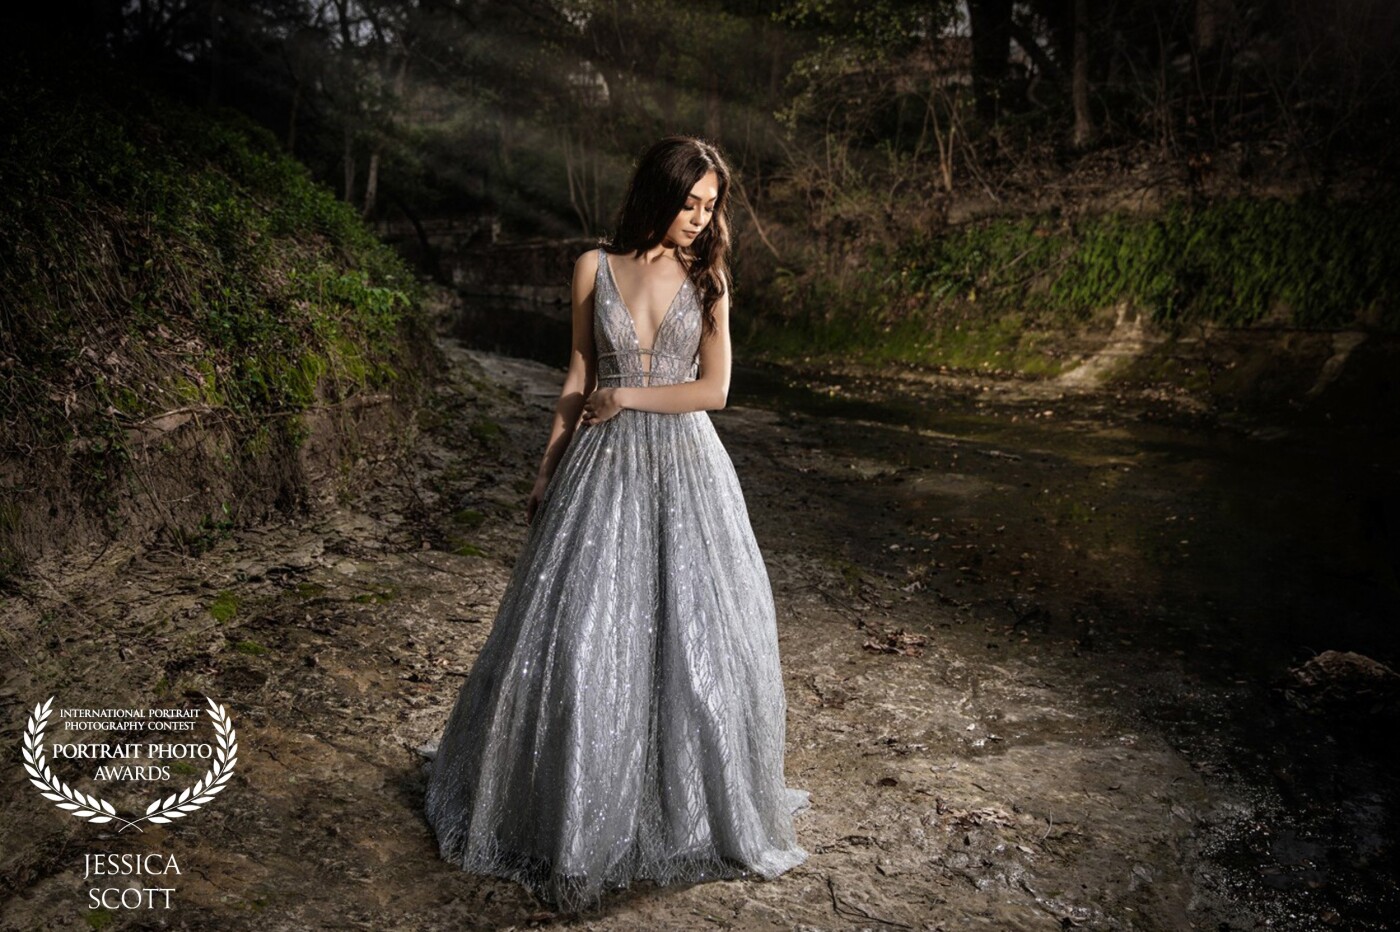 This portrait of Maddie was taken in an old creek in Dallas, Texas. This beautiful prom dress took this session to a whole other level. <br />
<br />
Shot with a Canon Mark IV and a 24-70mm L 2.8 lens. I had a wireless Godox strobe off to the right side and another Godox strobe highlighting her hair. The background was lit up with 2 Canon 600EX RT flashes. 